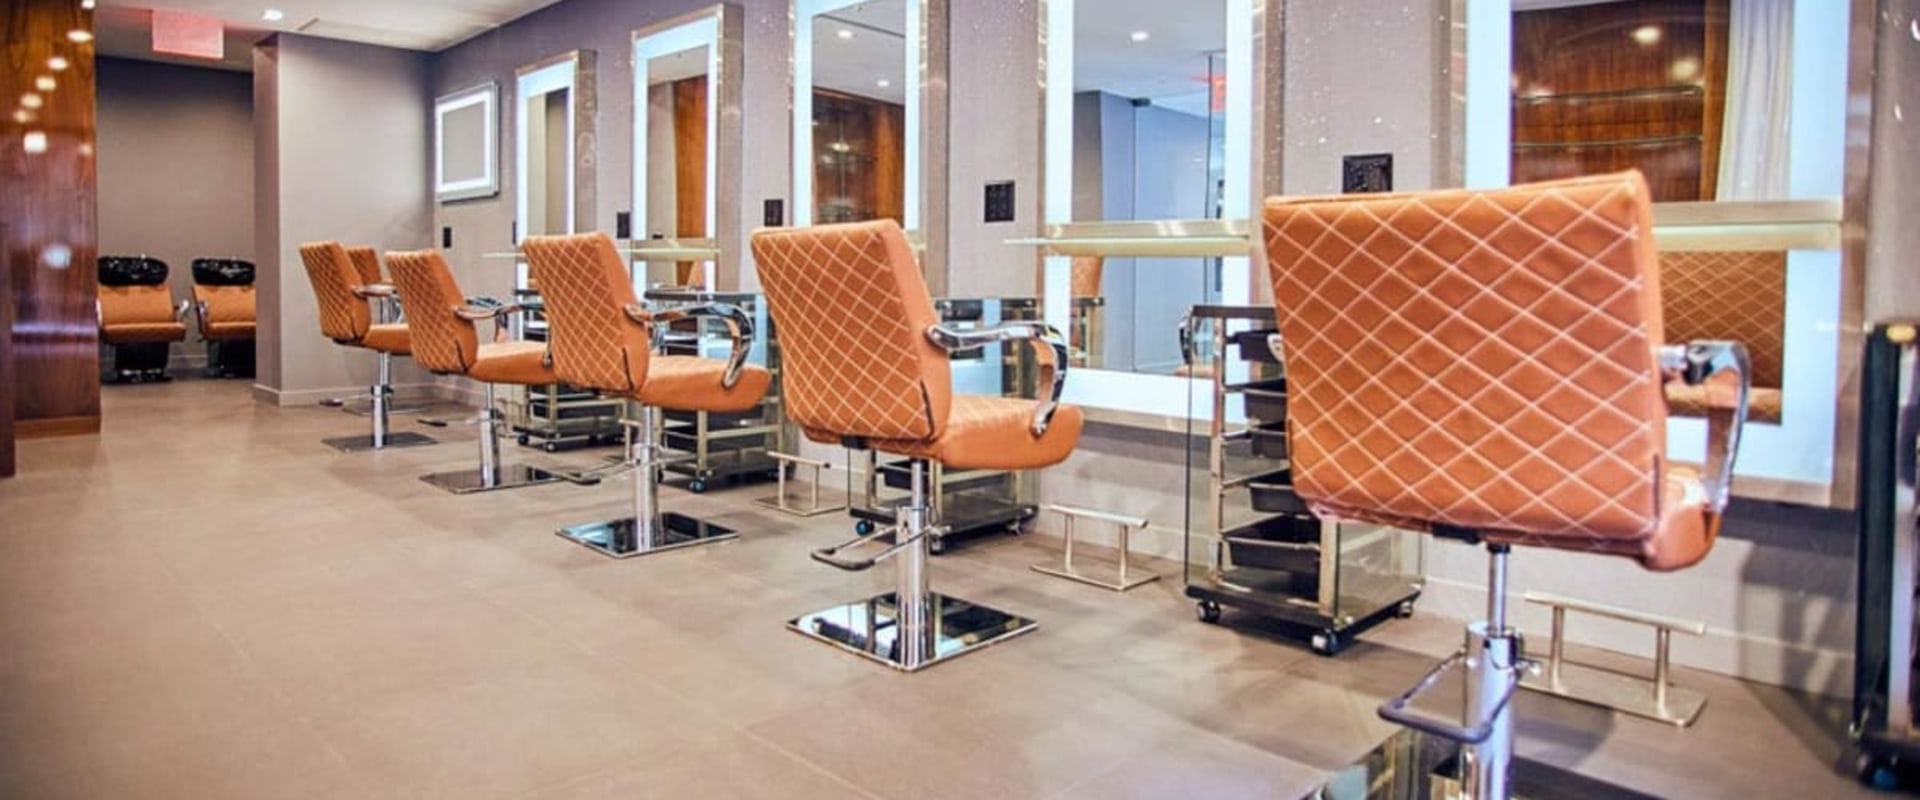 The Ultimate Guide to Finding the Best Hair Coloring Services in Buffalo, NY